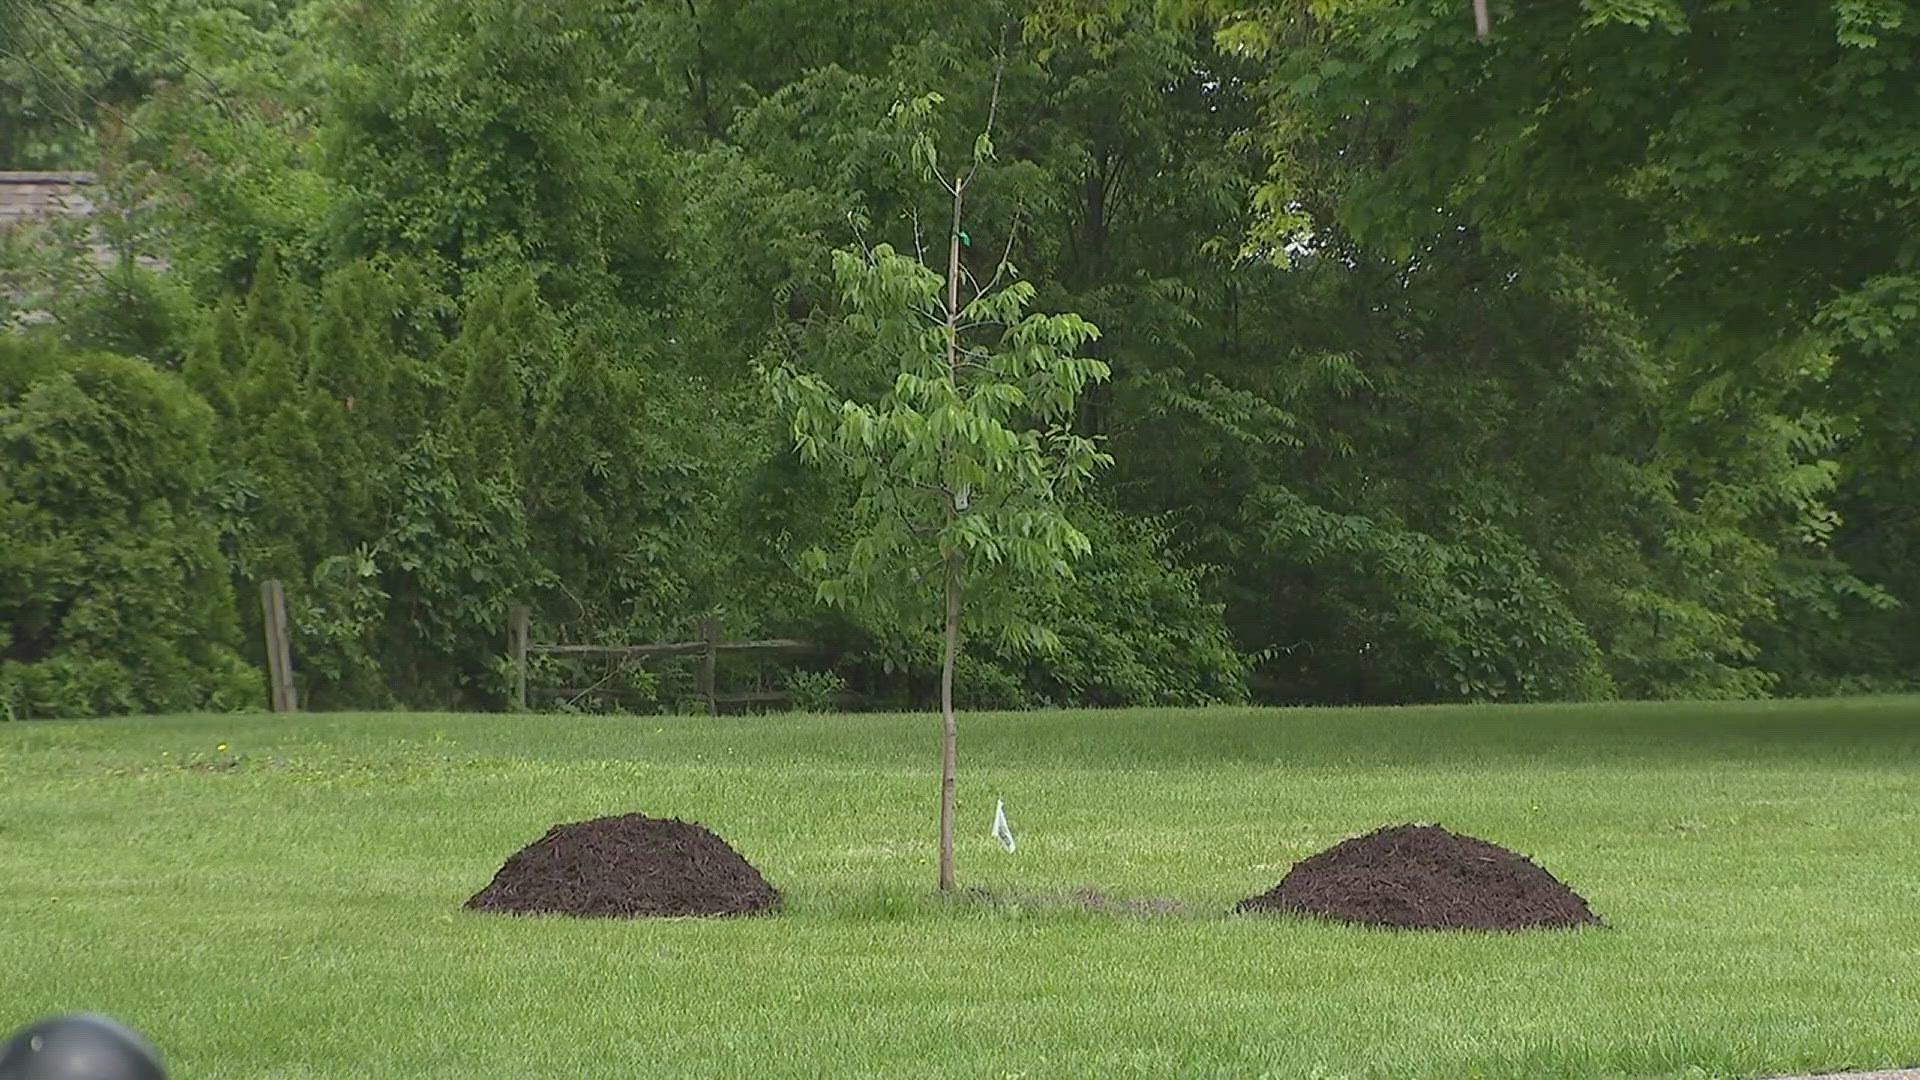 The department is working to replace trees lost to the 2020 derecho or insect infestations.